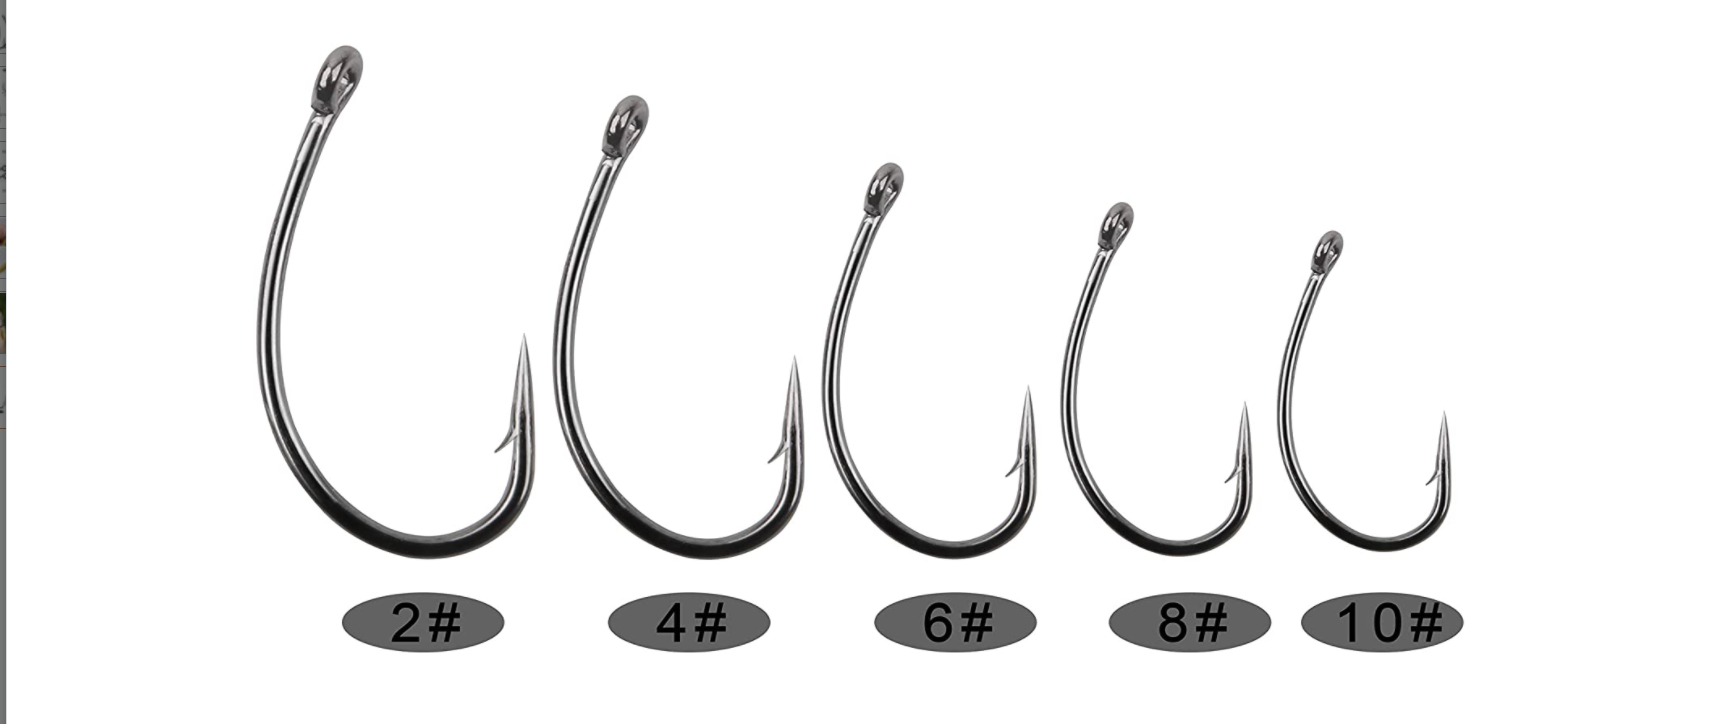 FISHING HOOKS 90 Pack of Hooks Eyes 10 Assorted Sizes Barbless All Speeds Water 